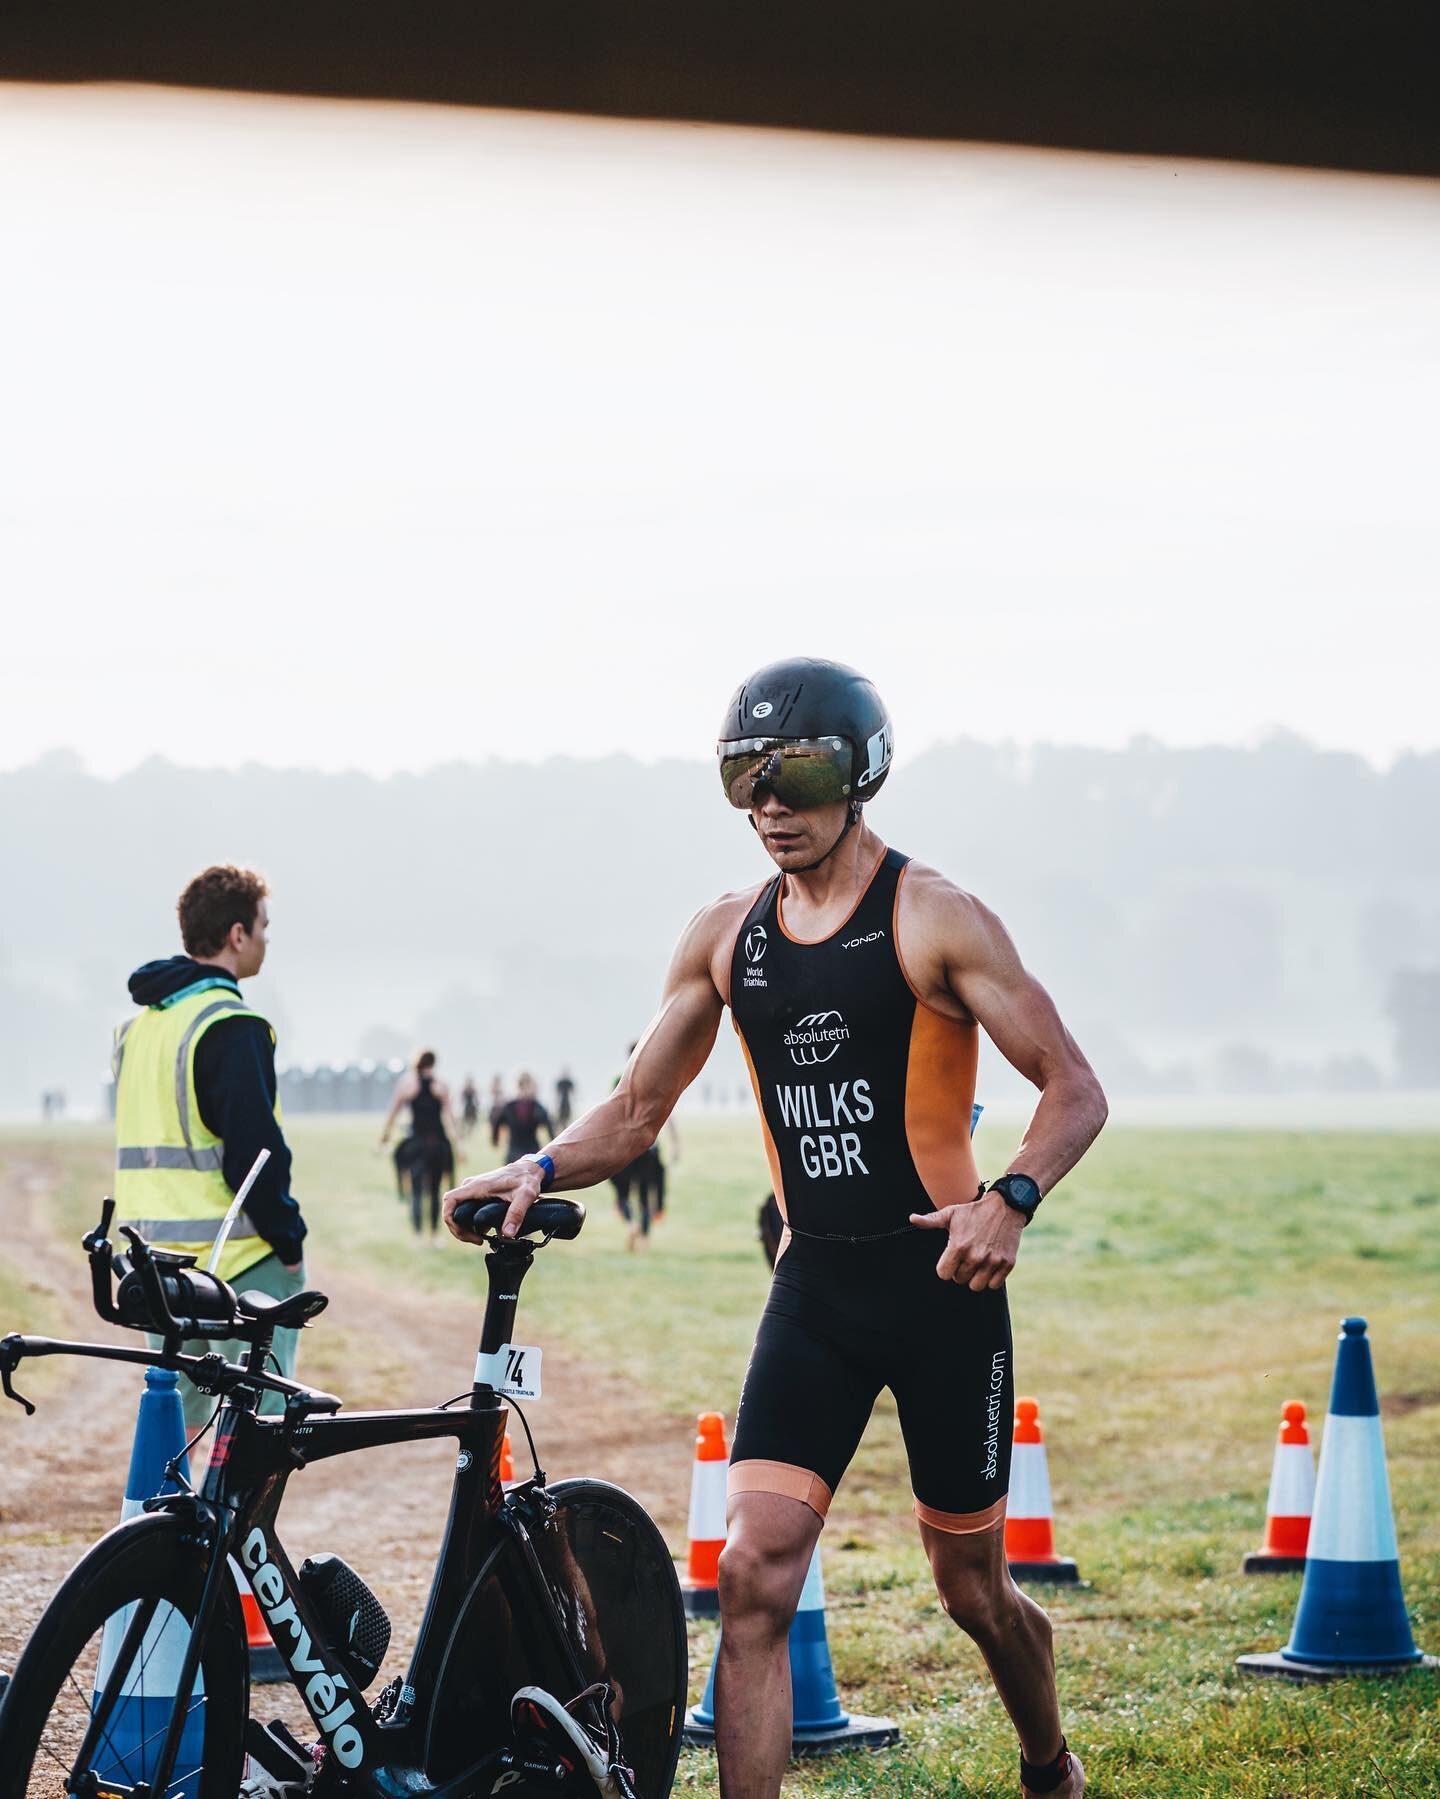 🔊 Last orders for East Leake &lsquo;End of Season&rsquo; Triathlon 24th sept &hellip;. Entries close 11:59pm TONIGHT (Sunday 17th)

📸 @aaron.jay.b